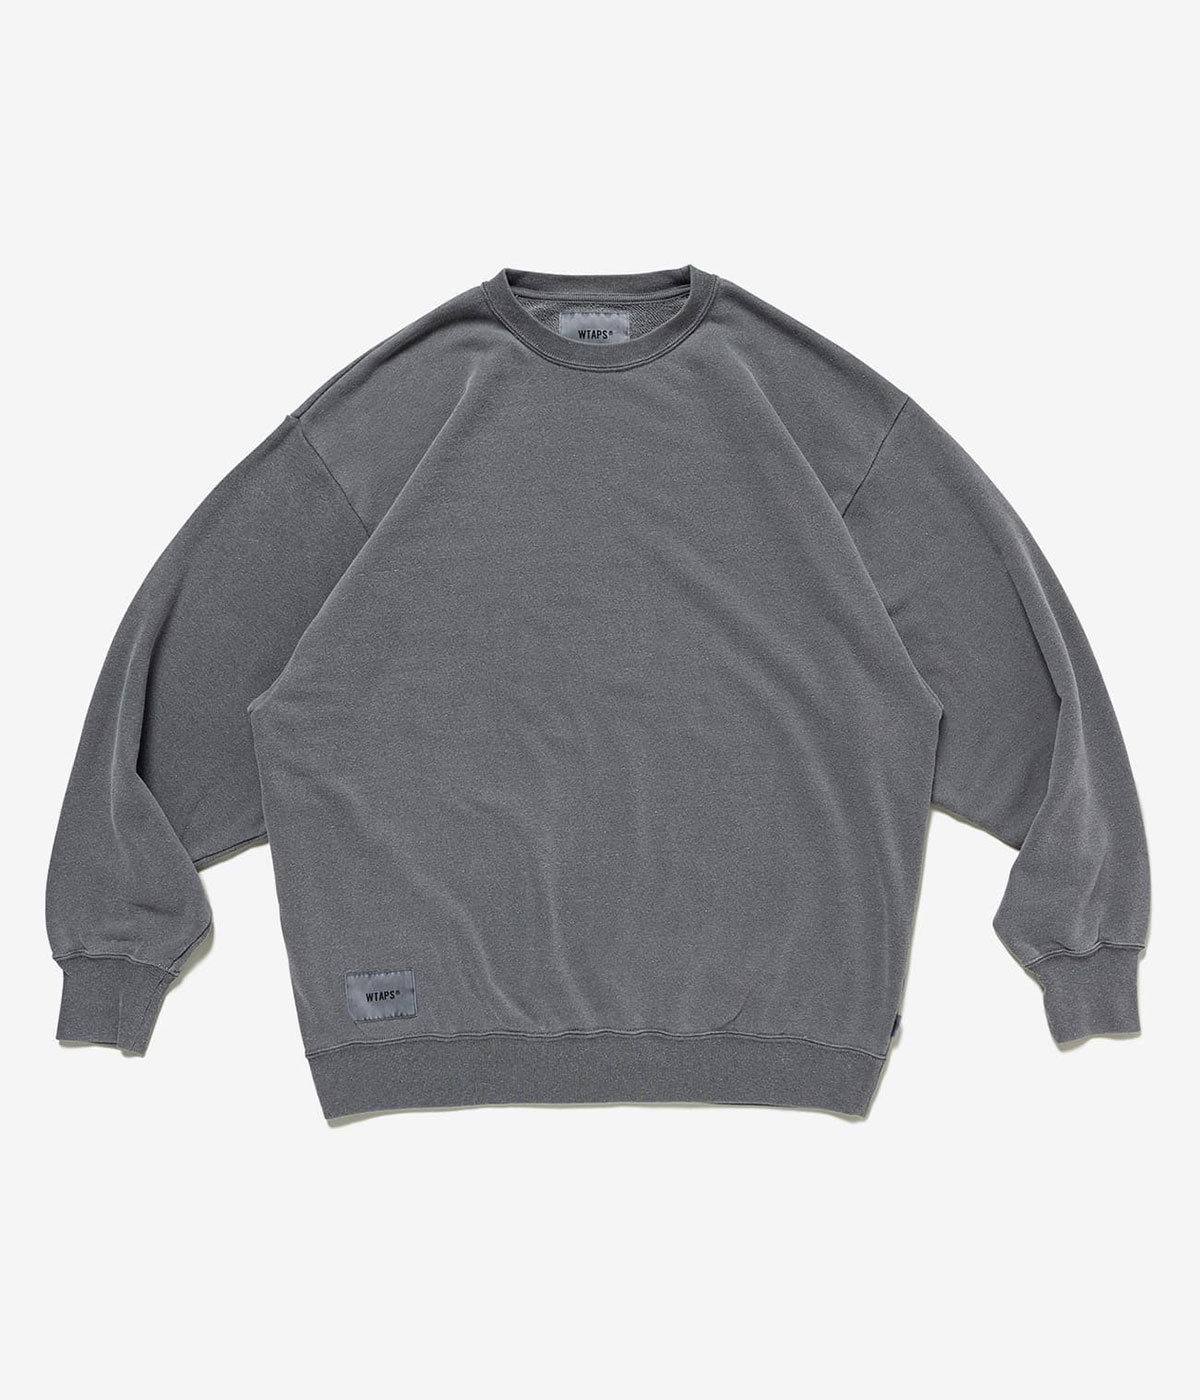 AII 03 / SWEATER / CTPL. SIGN | WTAPS(ダブルタップス) / トップス